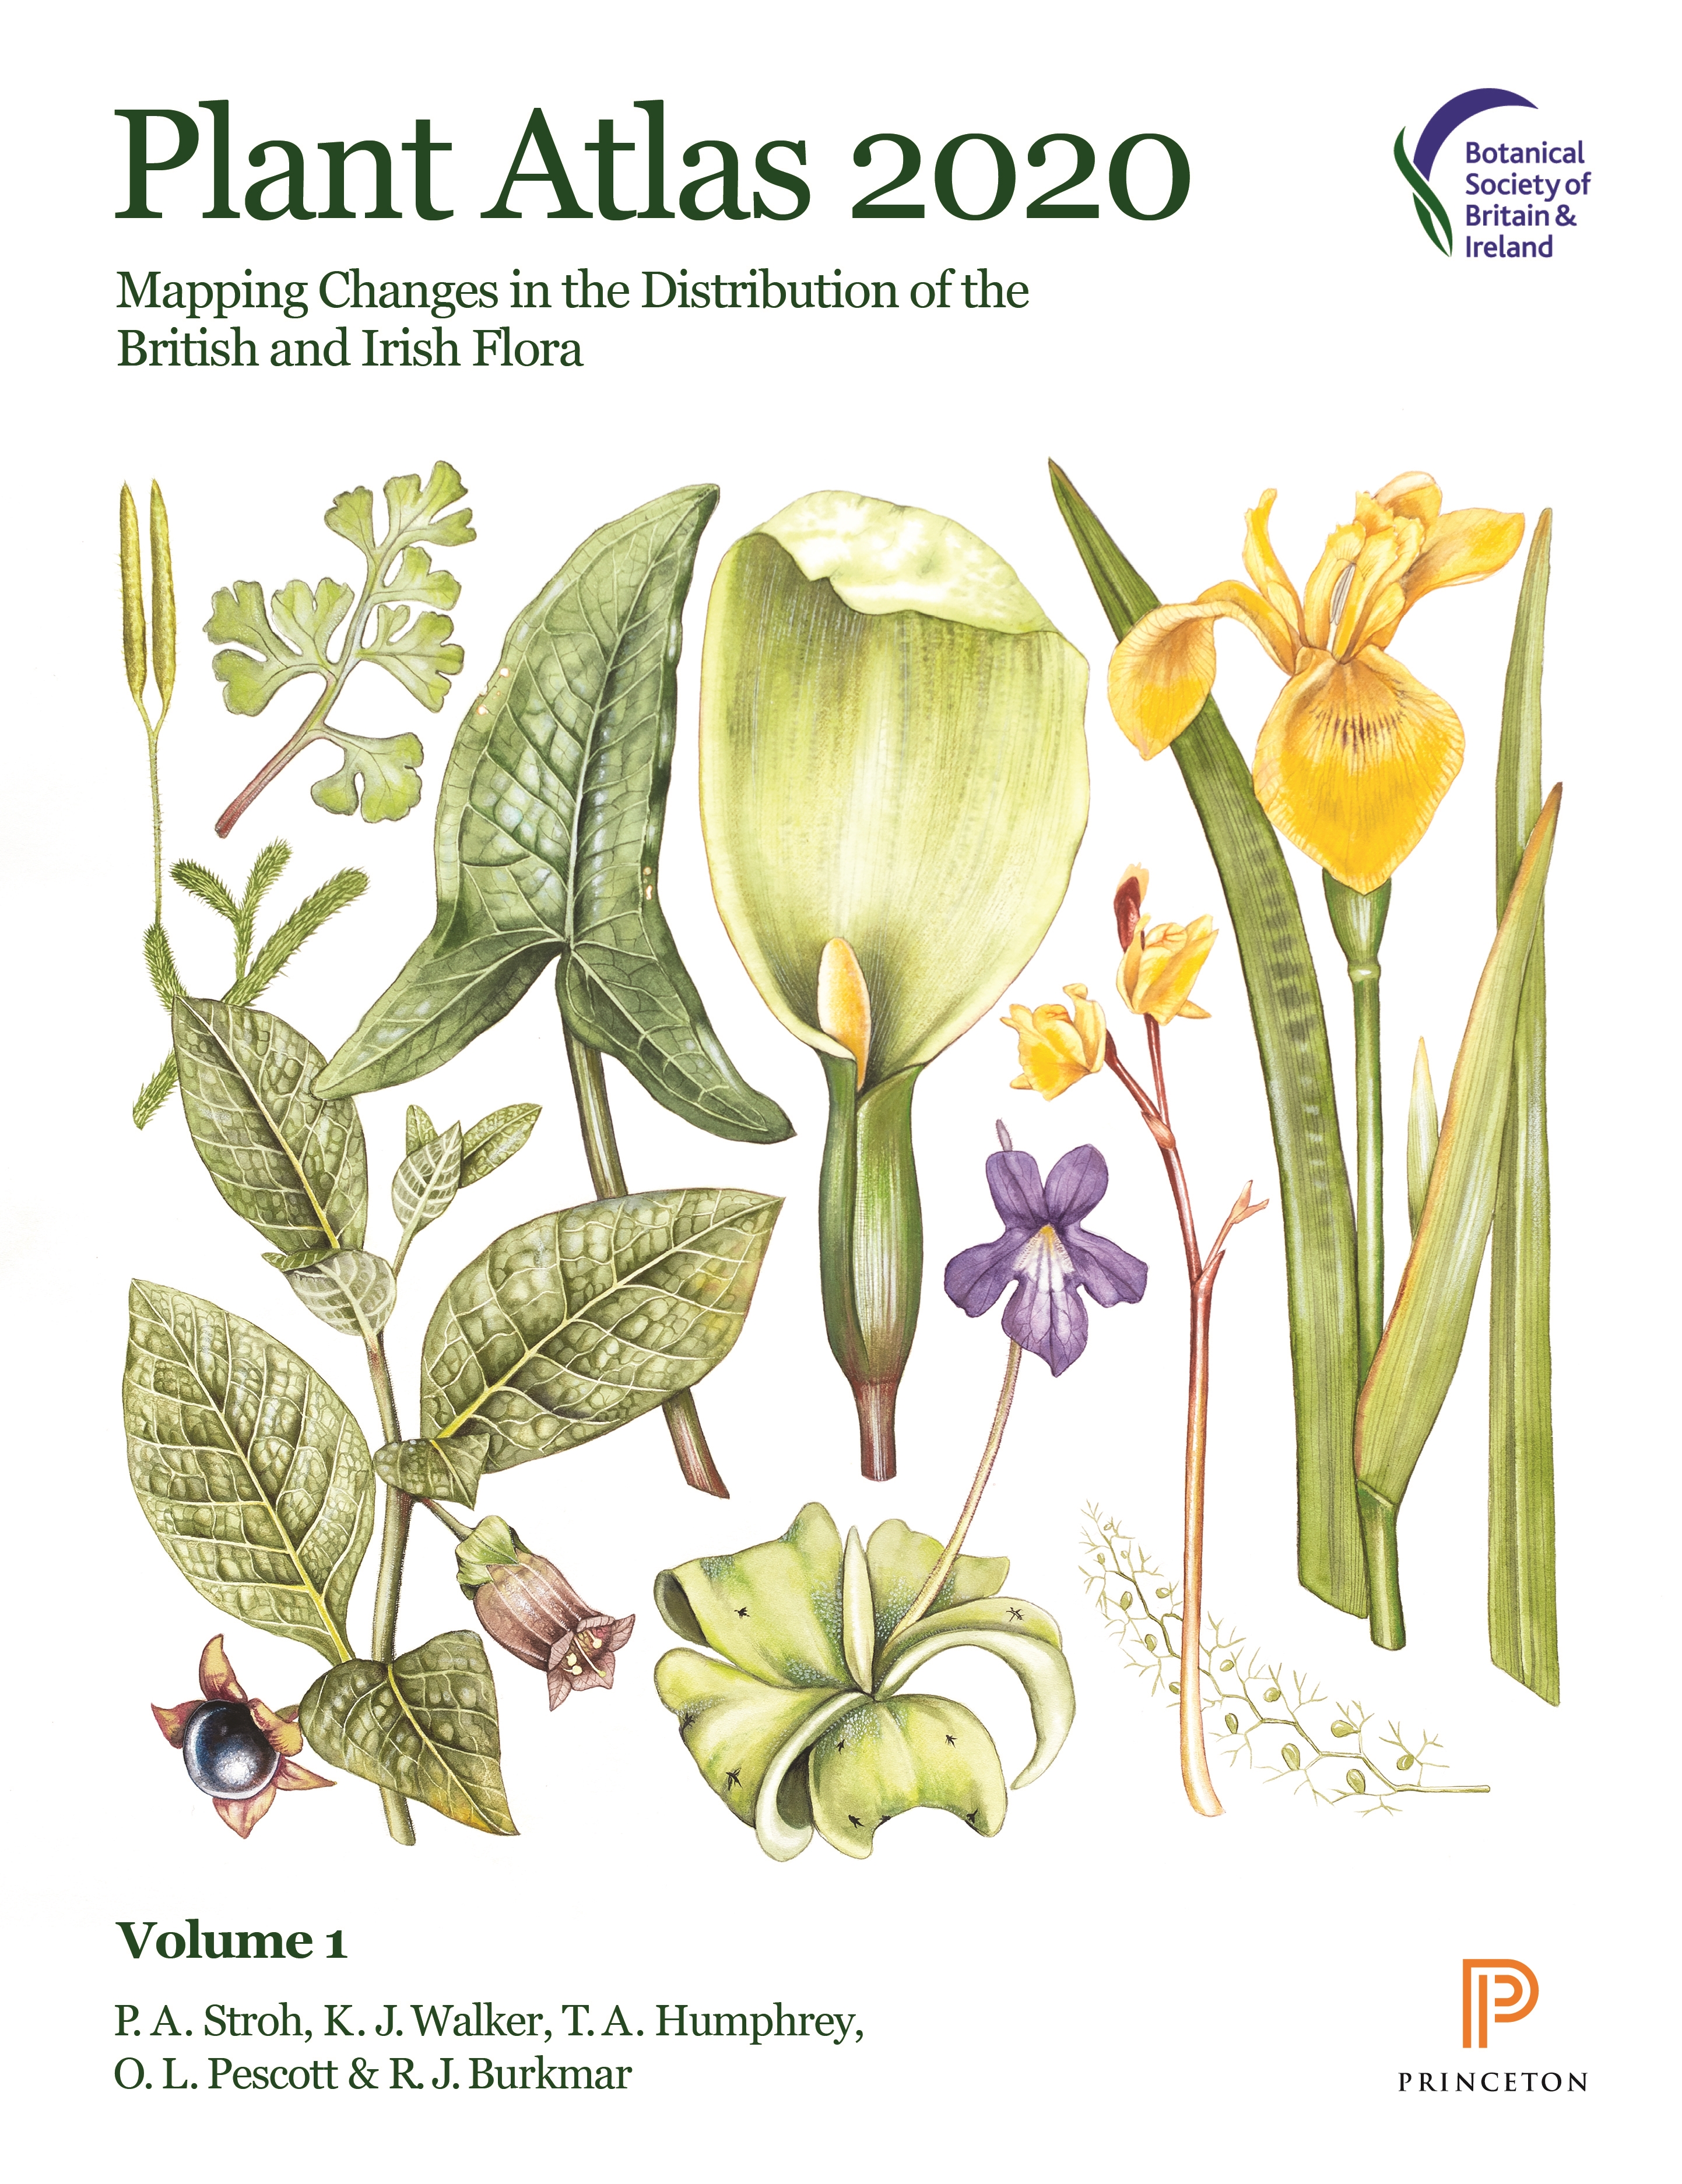 Plant Encyclopedia: Complete Online Plant and Flower Database